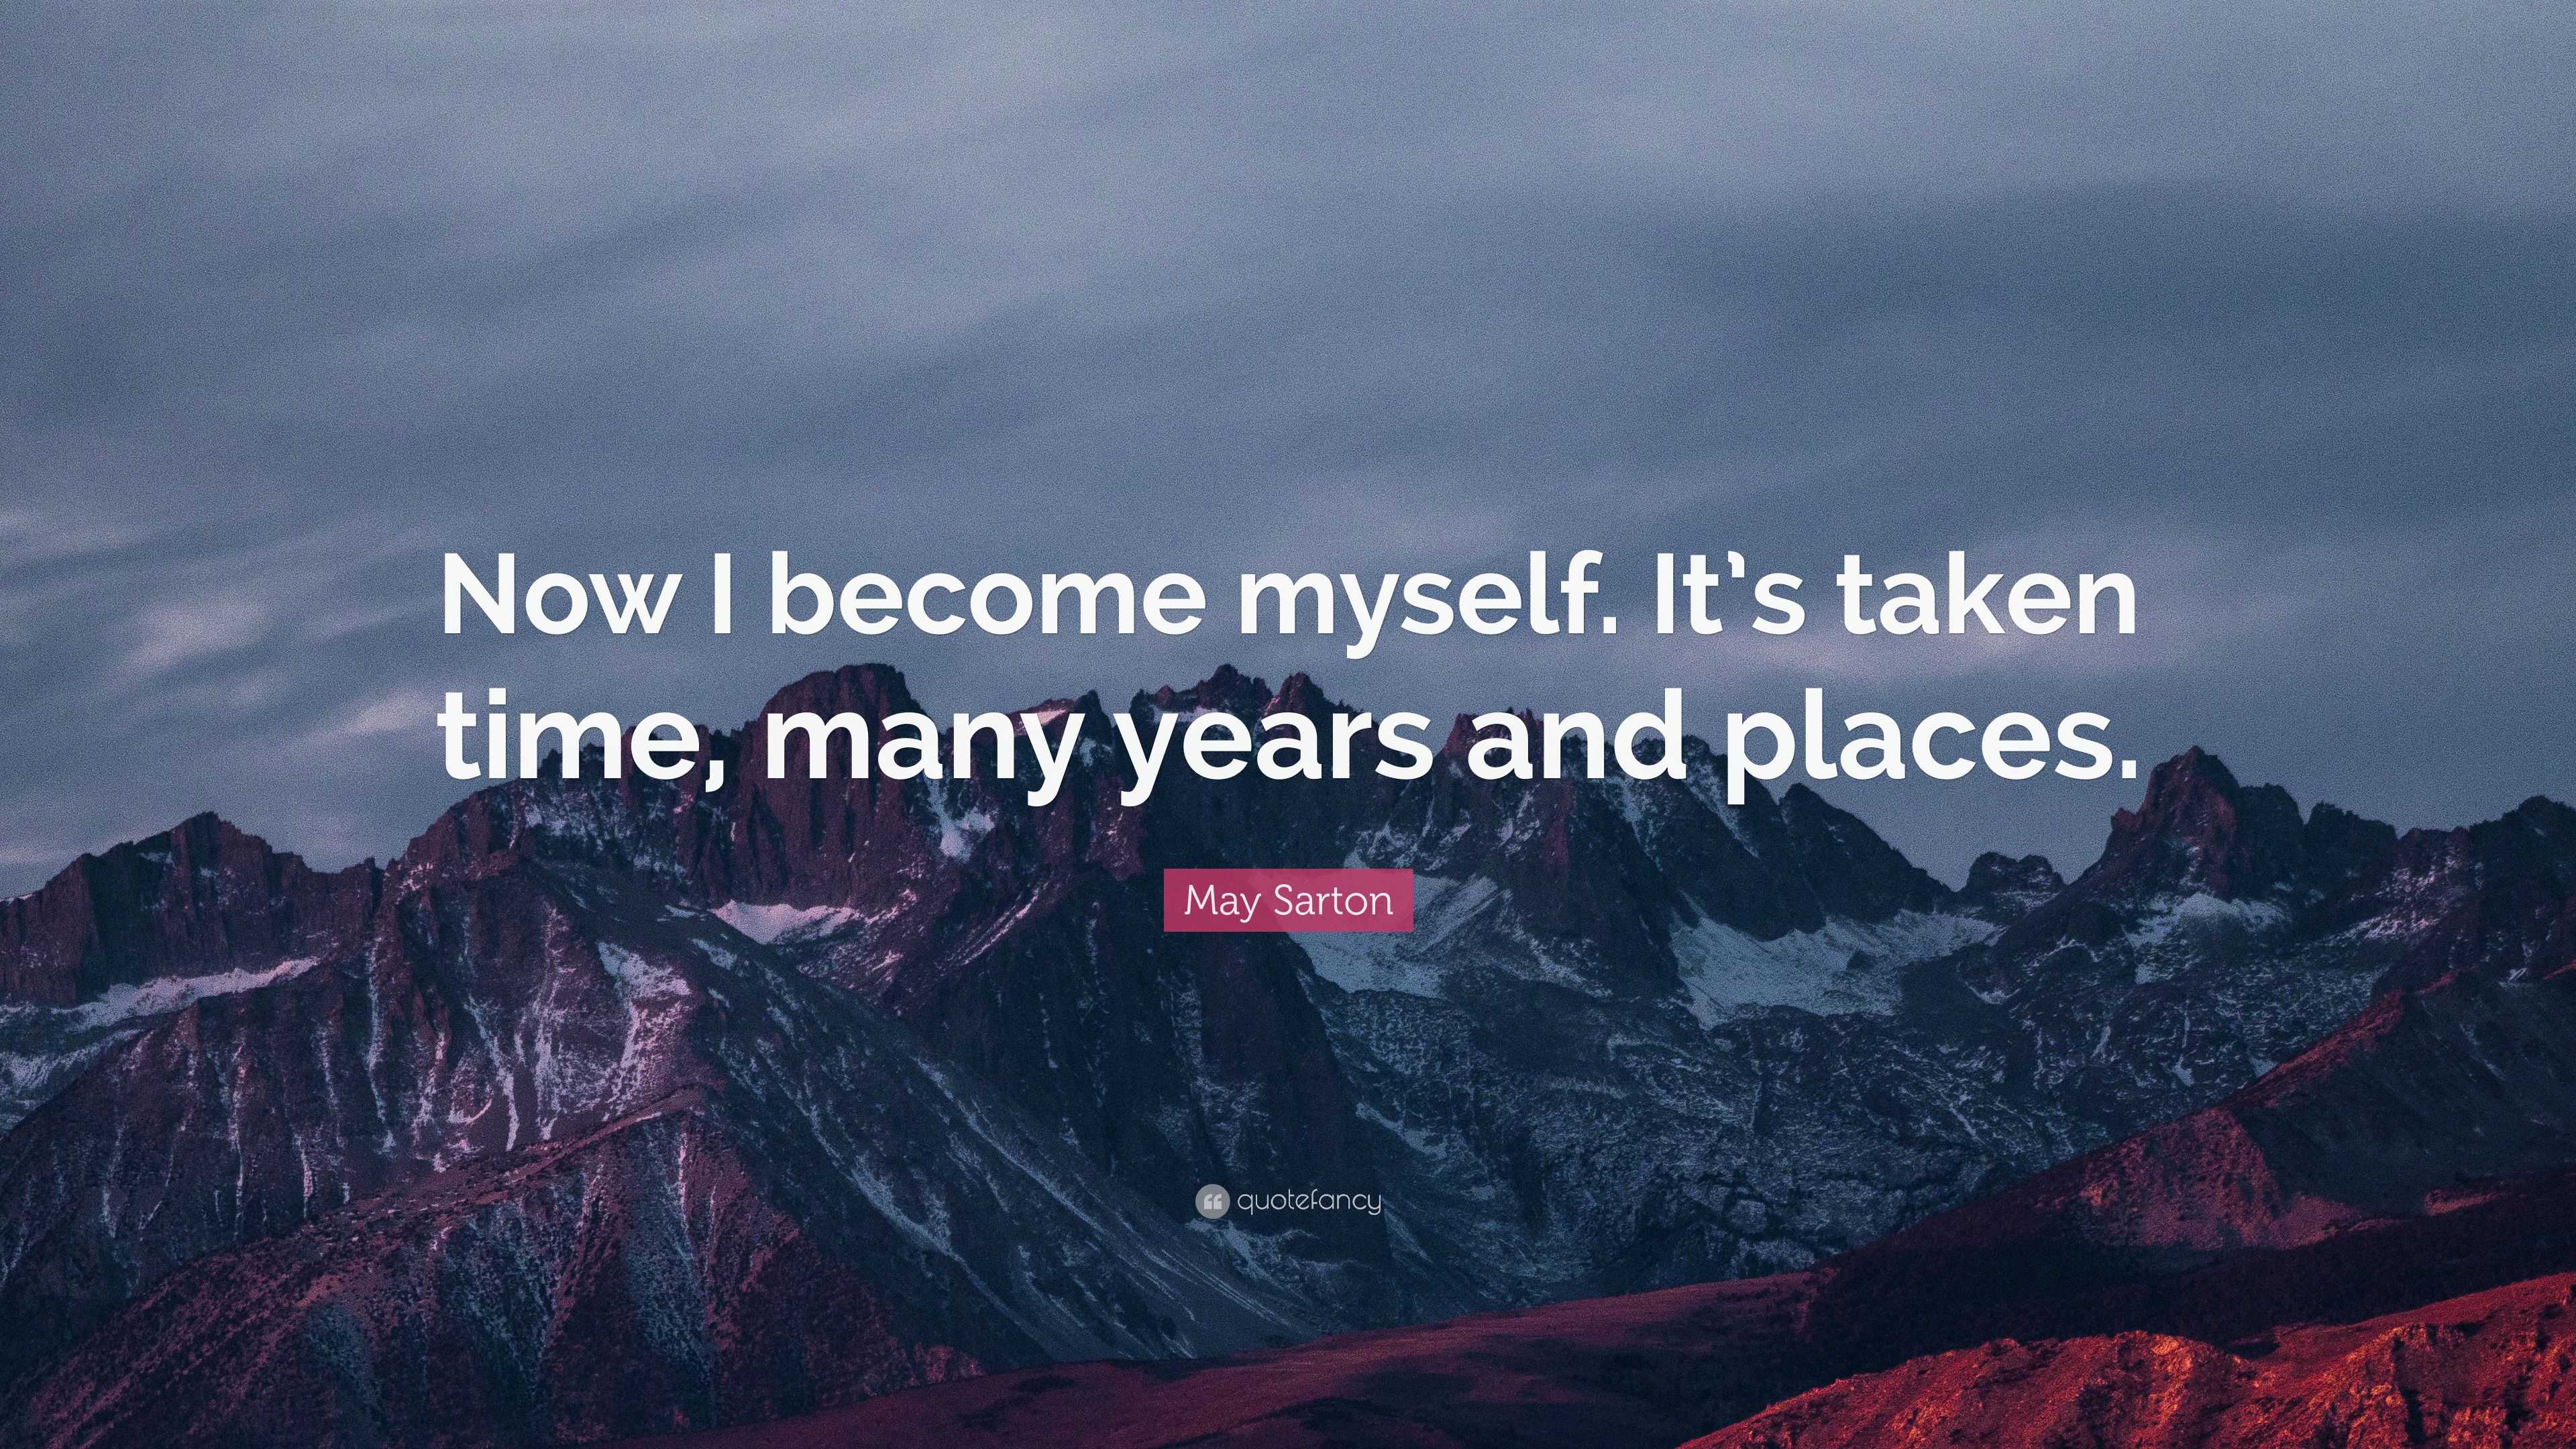 May Sarton Quote: “Now I become myself. It’s taken time, many years and ...